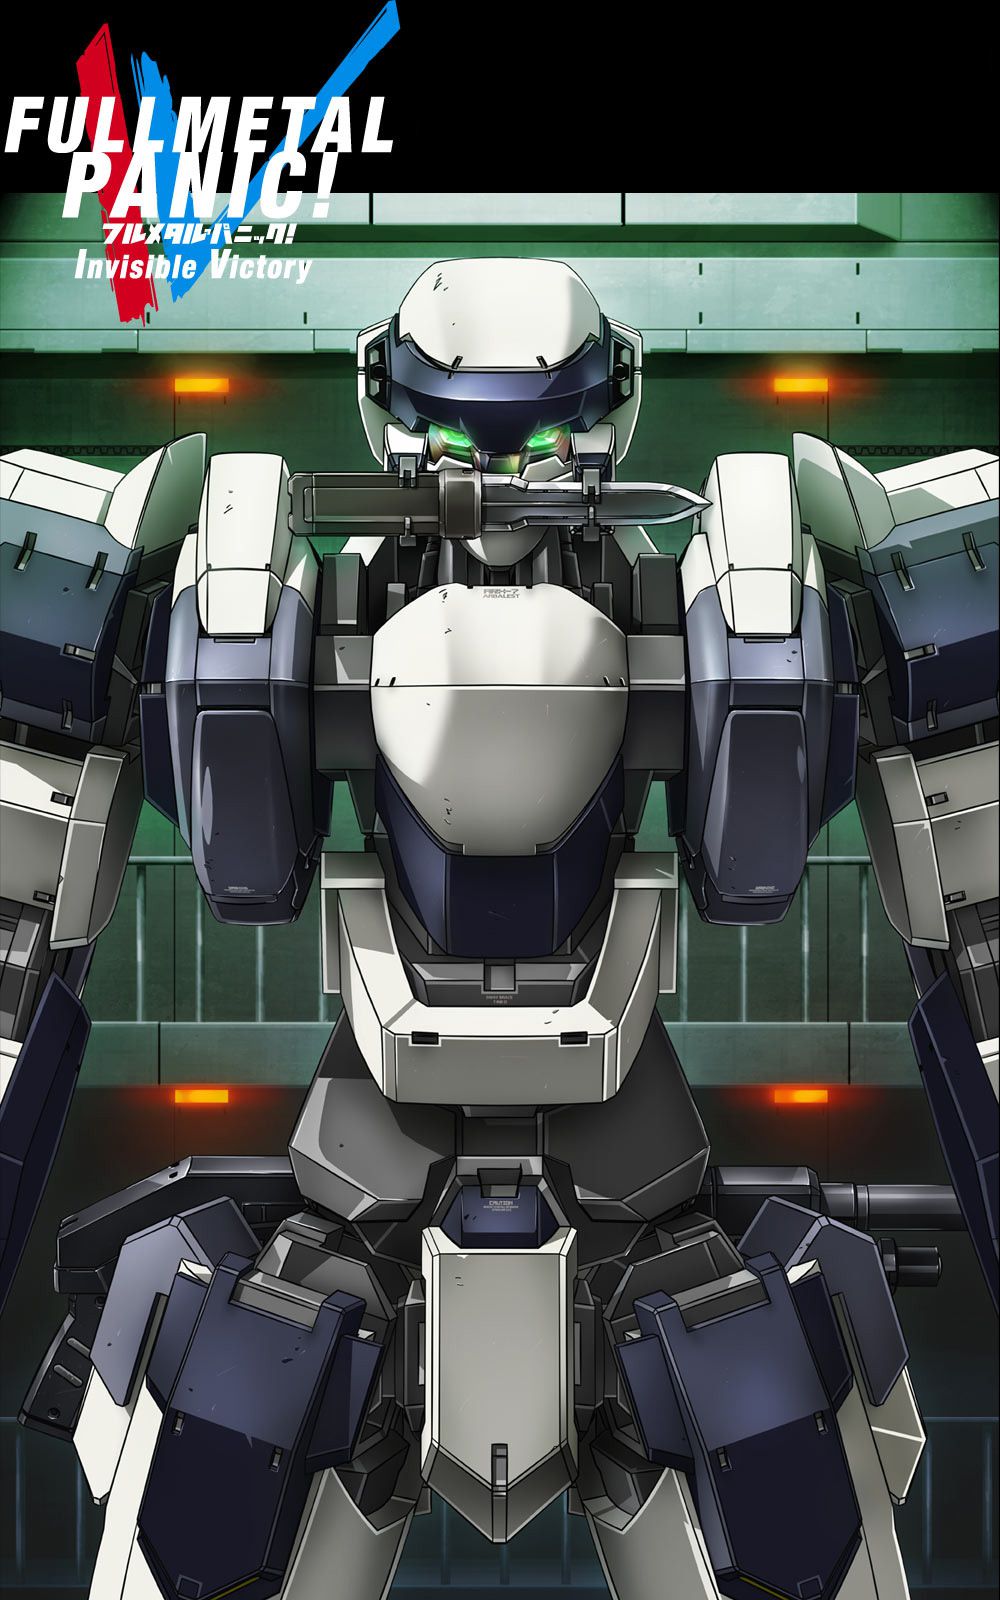 Full-Metal-Panic!-Invisible-Victory